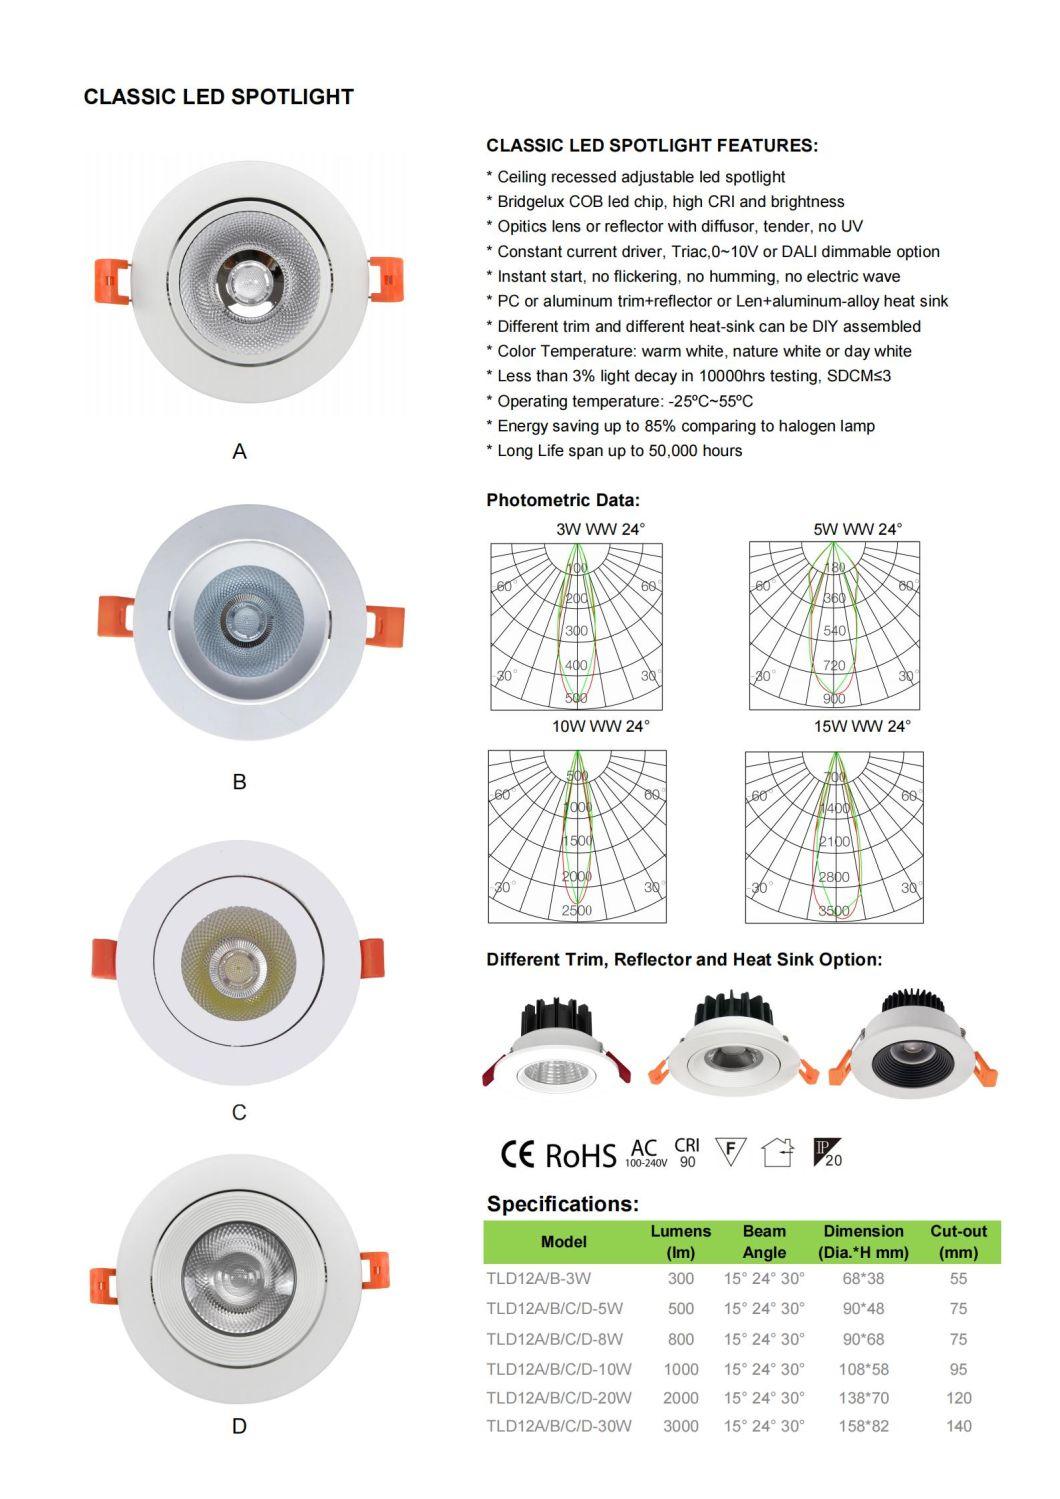 5W-7W Classic Ecolighting Europe Ceiling Recessed Adjustable LED Down Spot Light for Commercial Project Office Hotel Apartment Residential Corridor Rooms